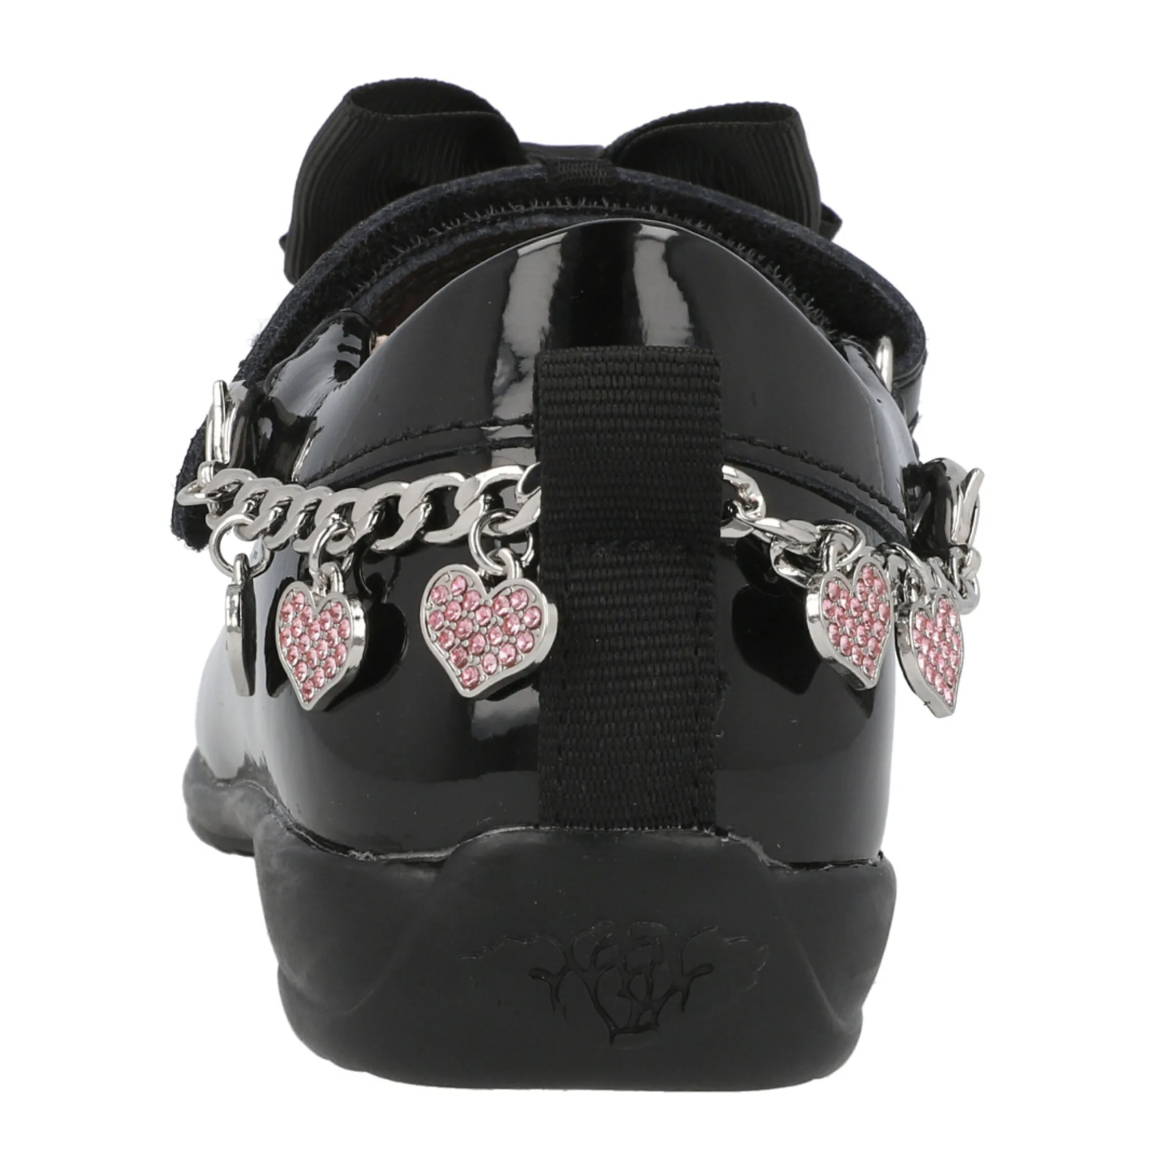 A girls Mary Jane school shoe by Lelli Kelly, style LK8224 Angel, in black patent leather with velcro fastening and detachable fabric bow and bracelet. Close up view from back.